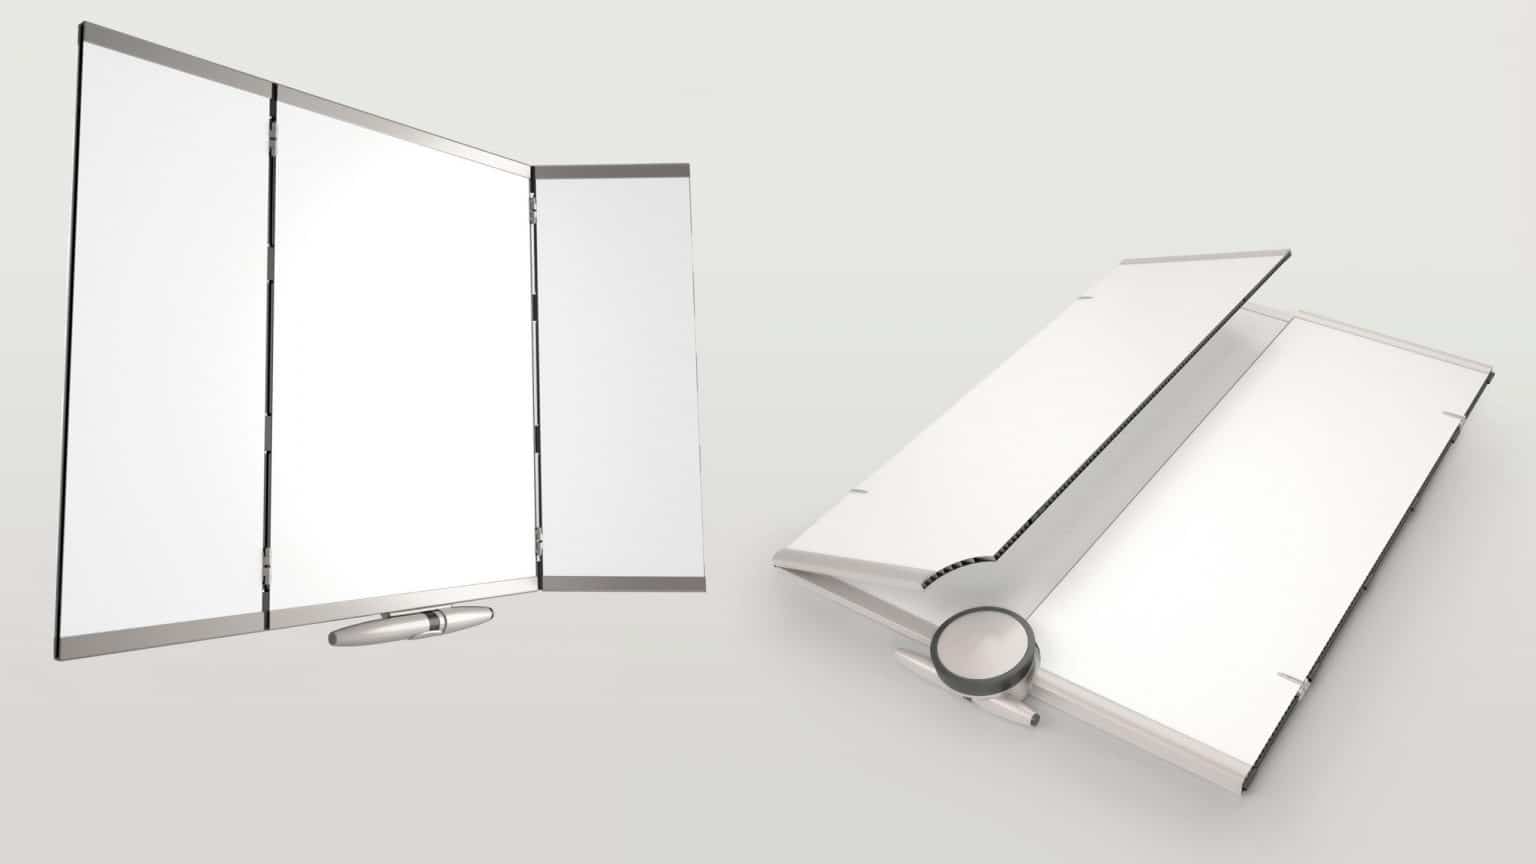 Tenex Trifold White Board Opened and Closed